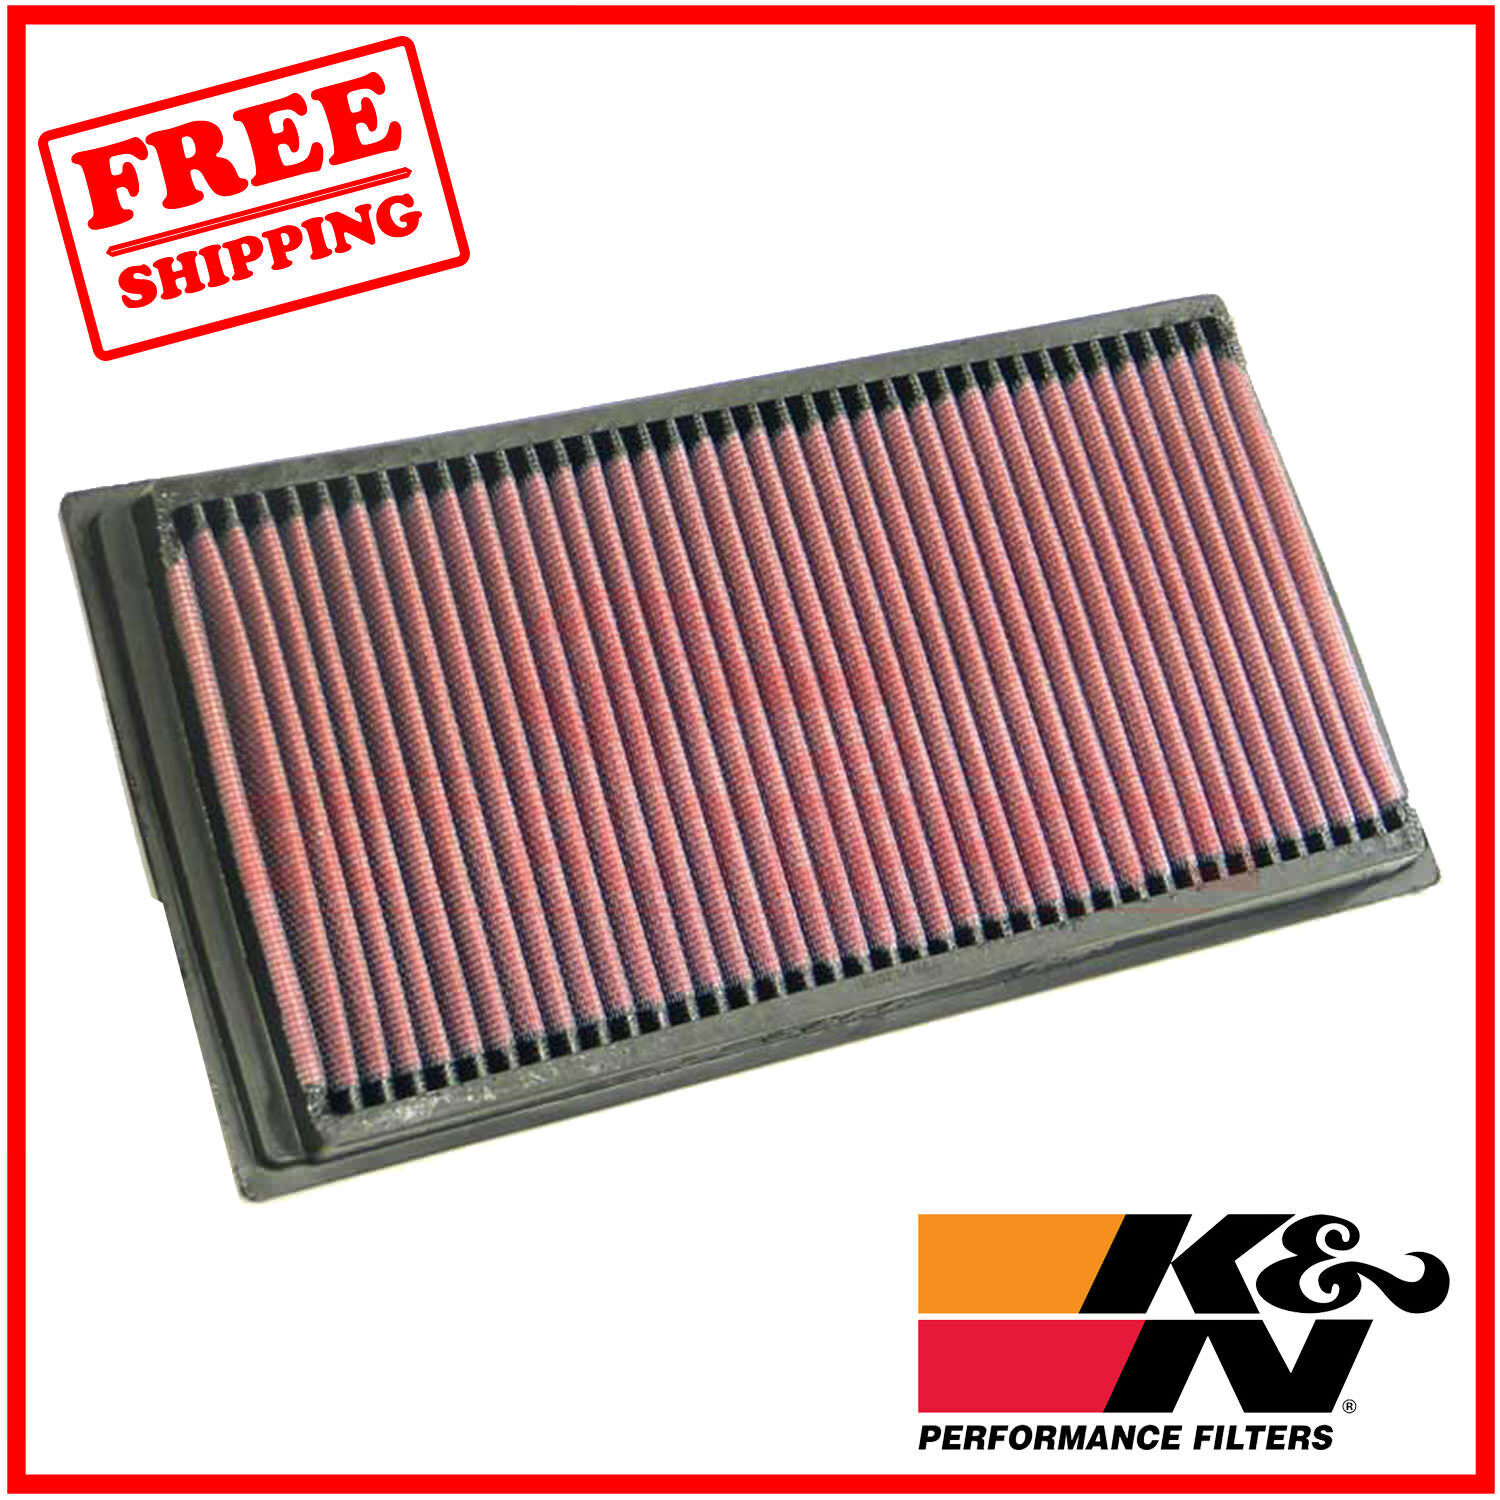 K&N Replacement Air Filter for BMW 750iL 1994-2001